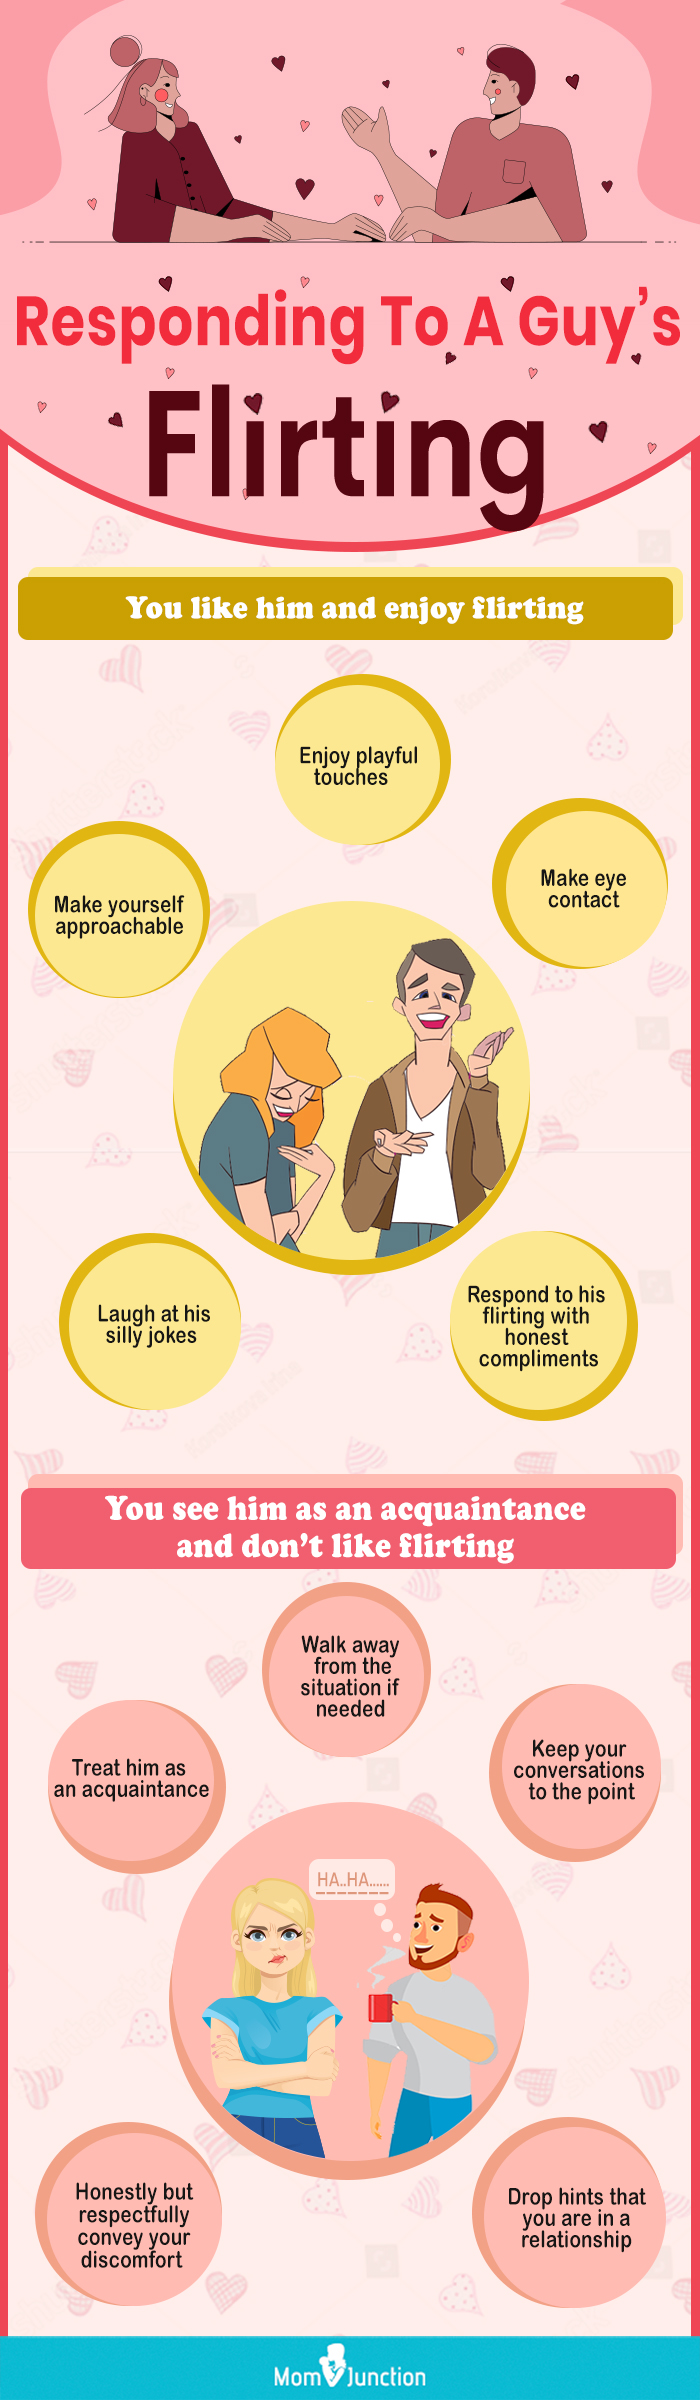 ways to respond to a guys flirting (infographic)